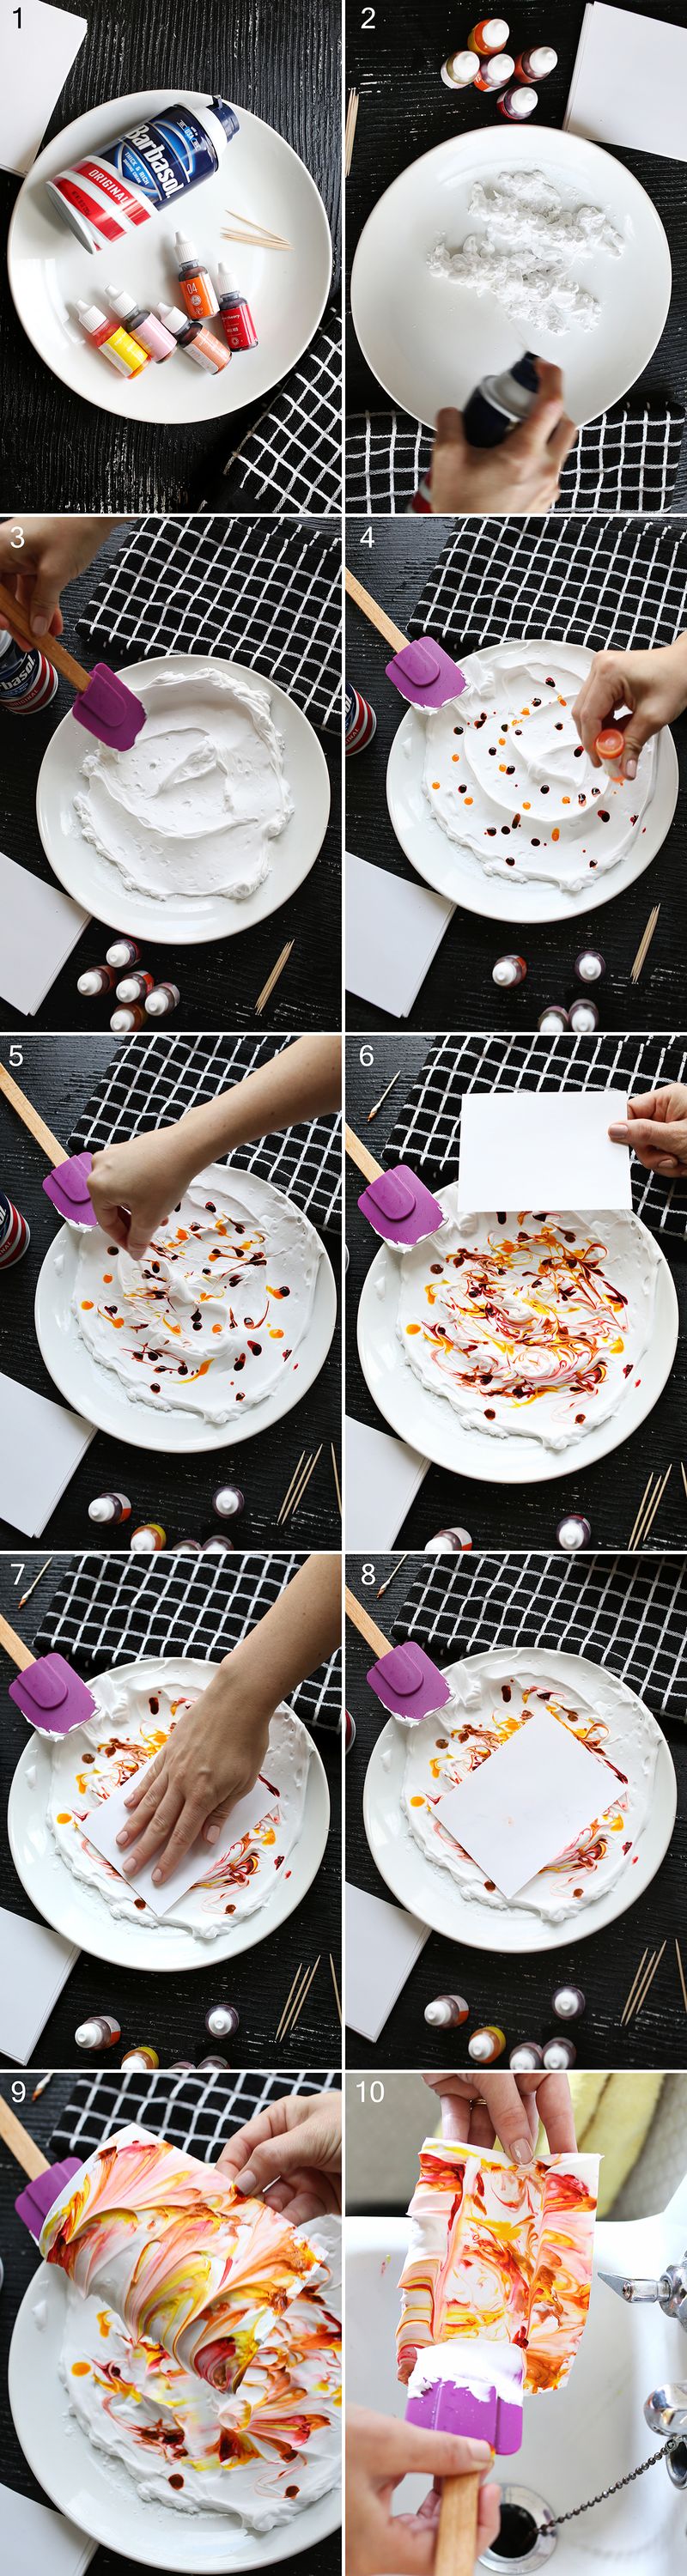 How to marble with shaving cream and ink! (click though for more details!)